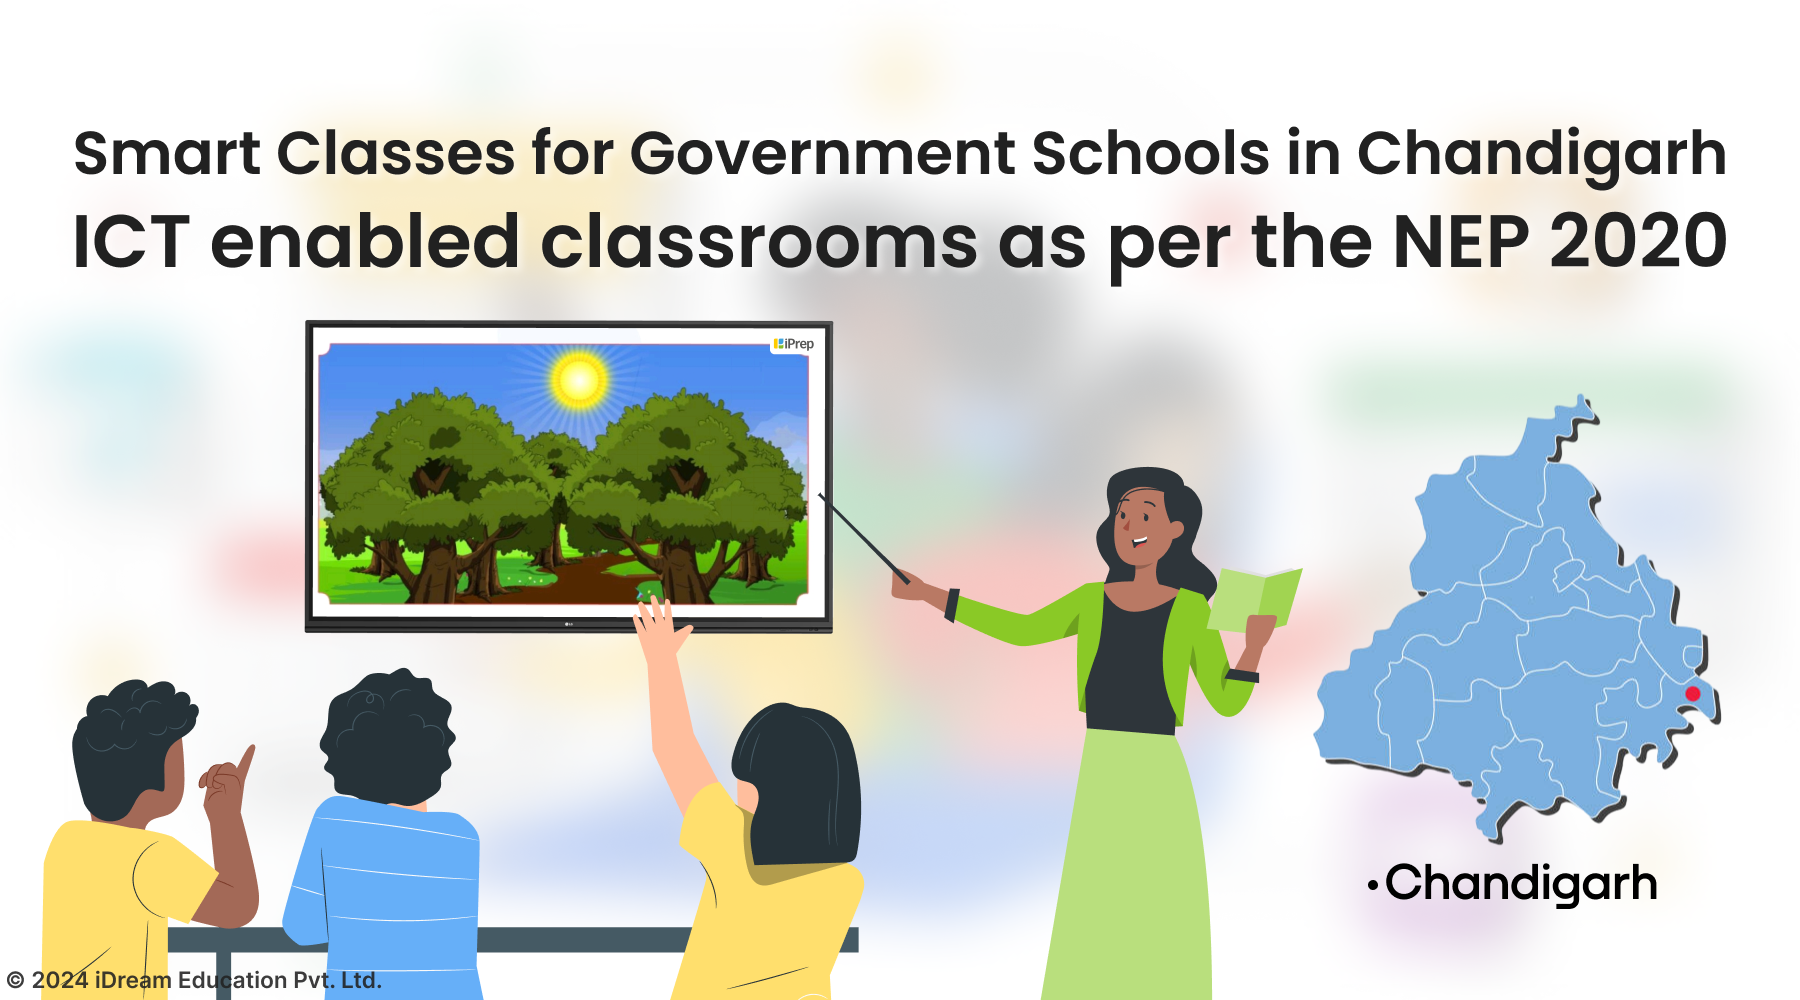 Smart Classes for Government Schools in Chandigarh - ICT enabled classrooms as per the NEP 2020